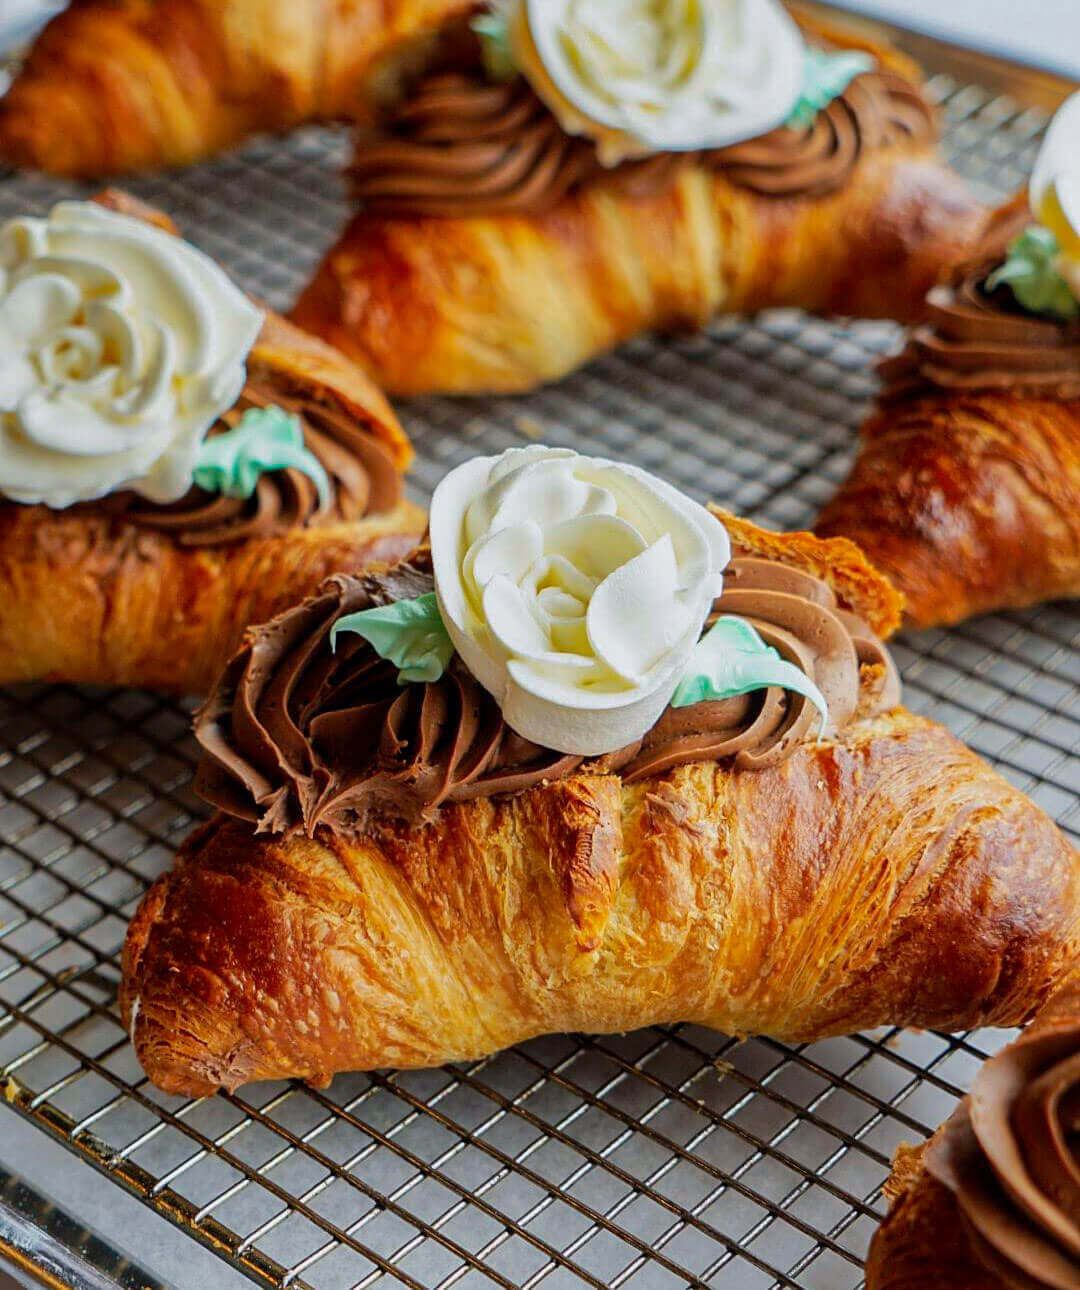 Croissants stuffed with goodness.